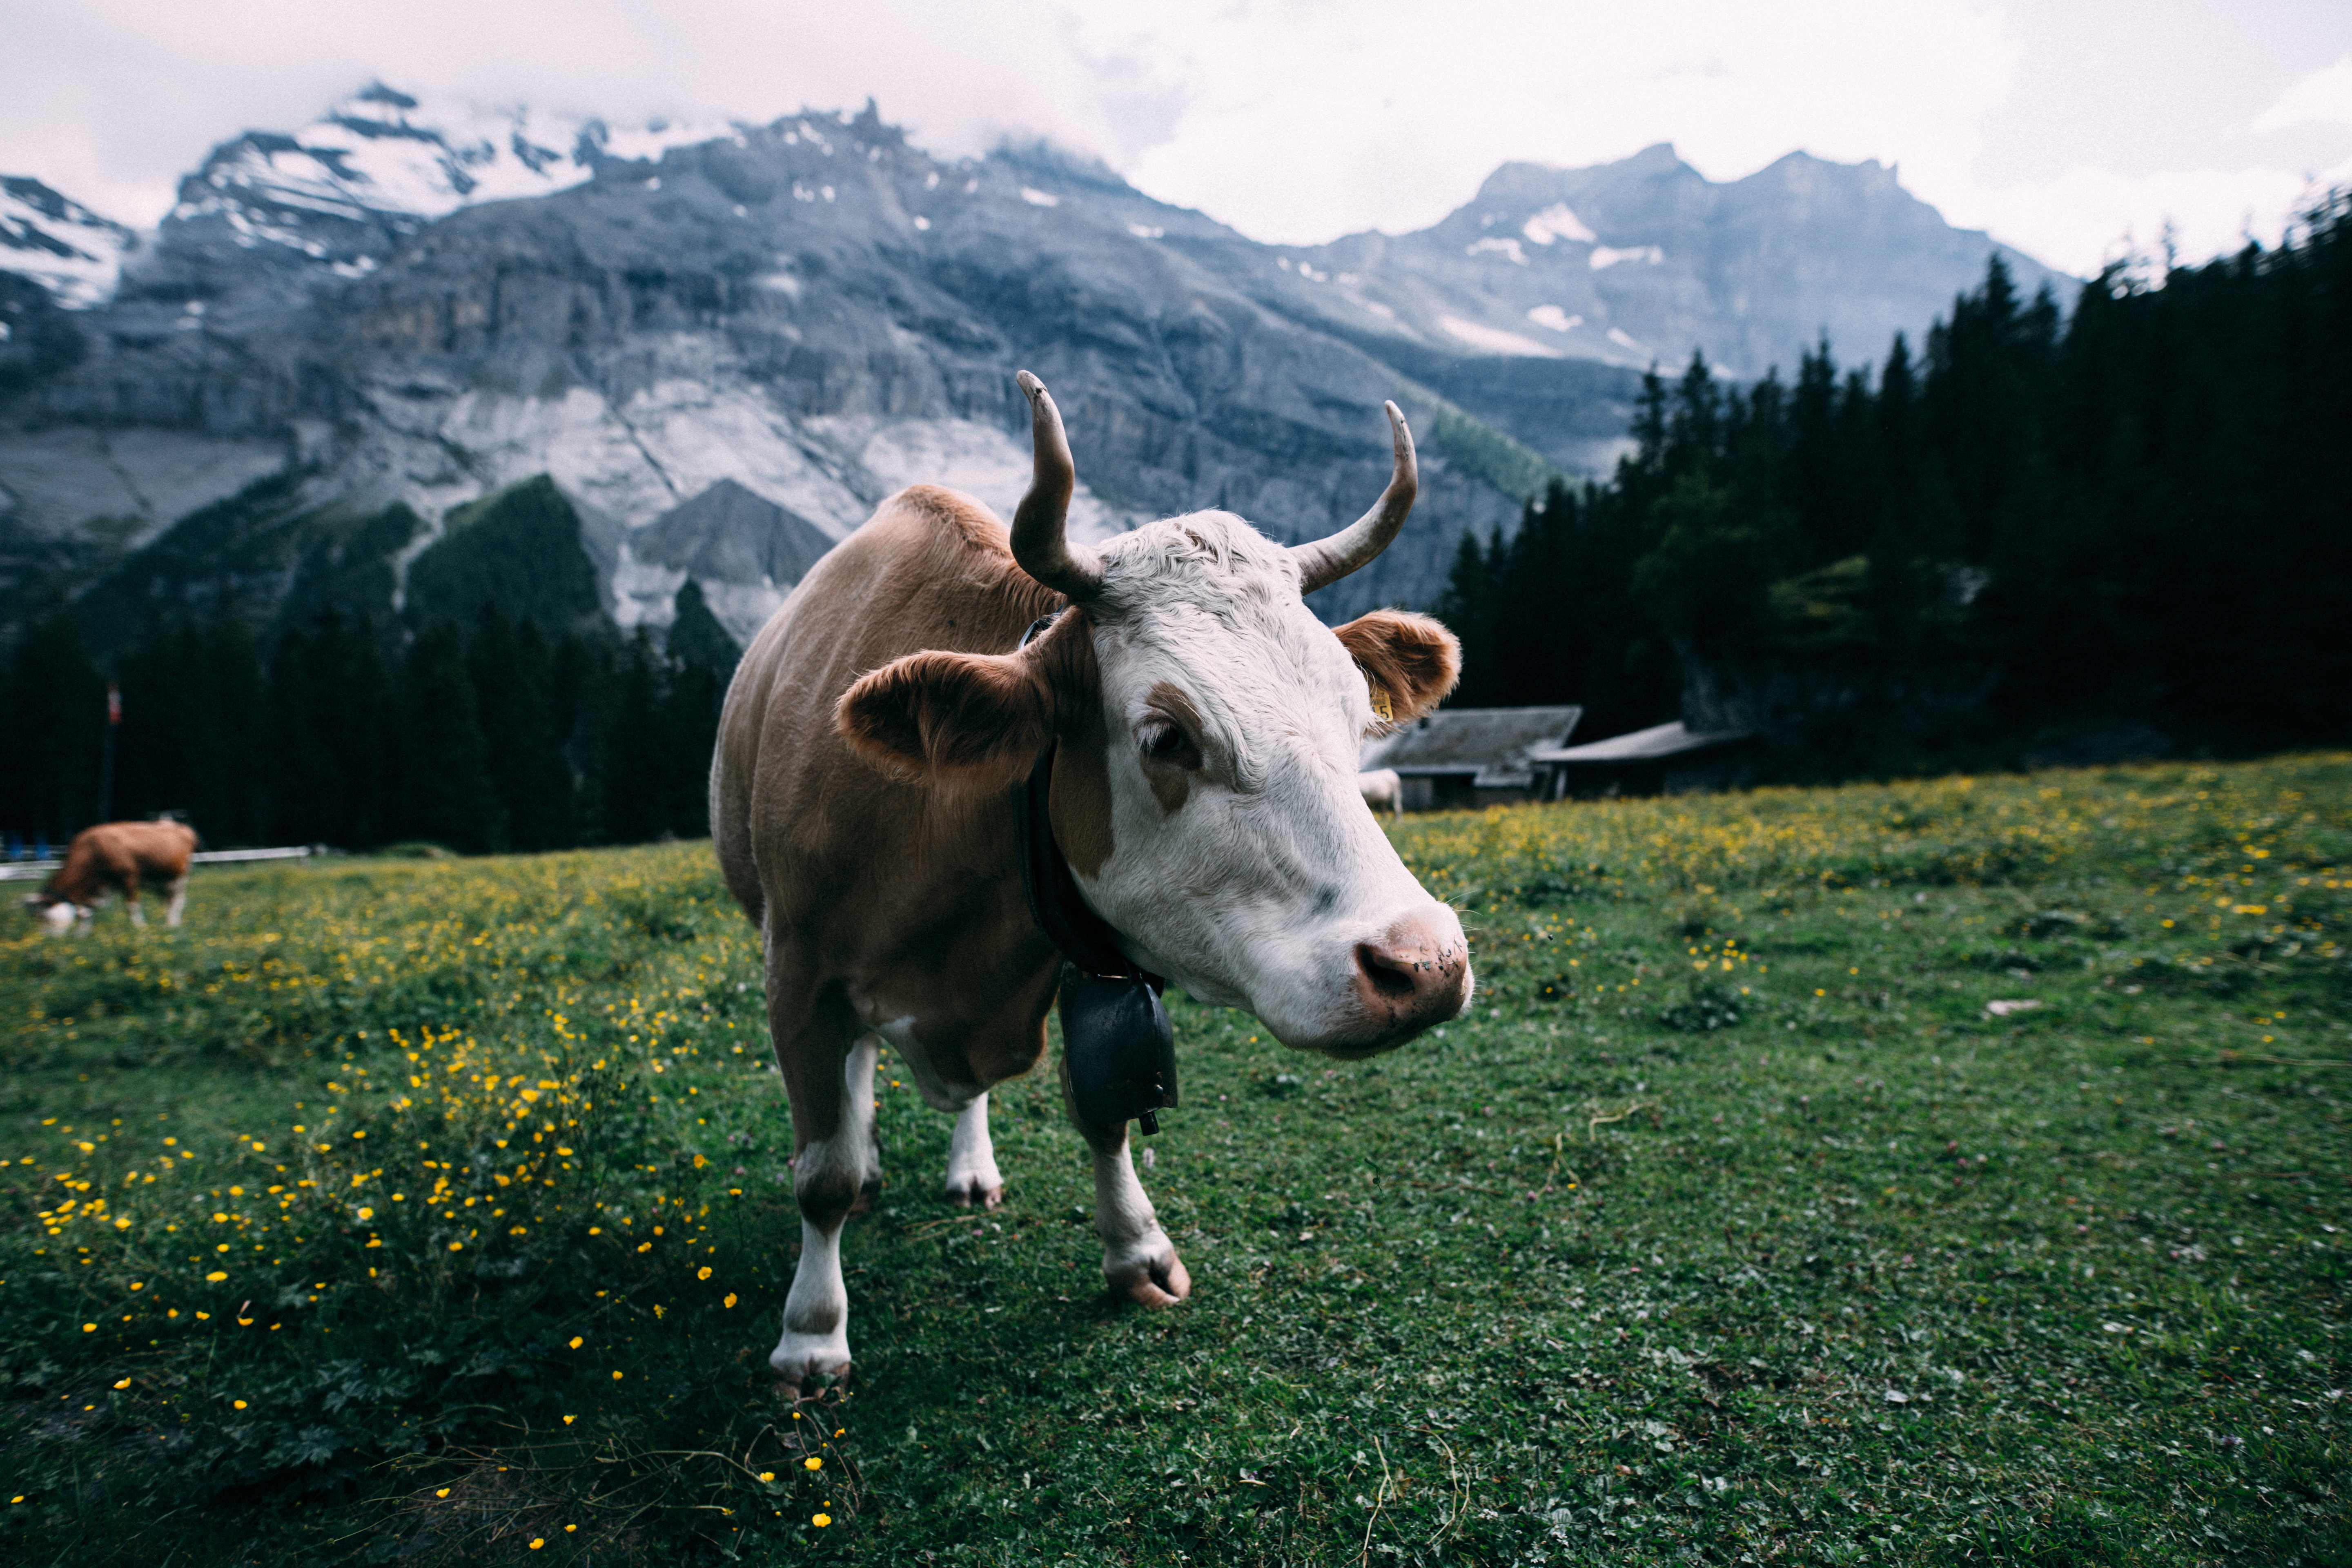 A bull with horns in the mountains